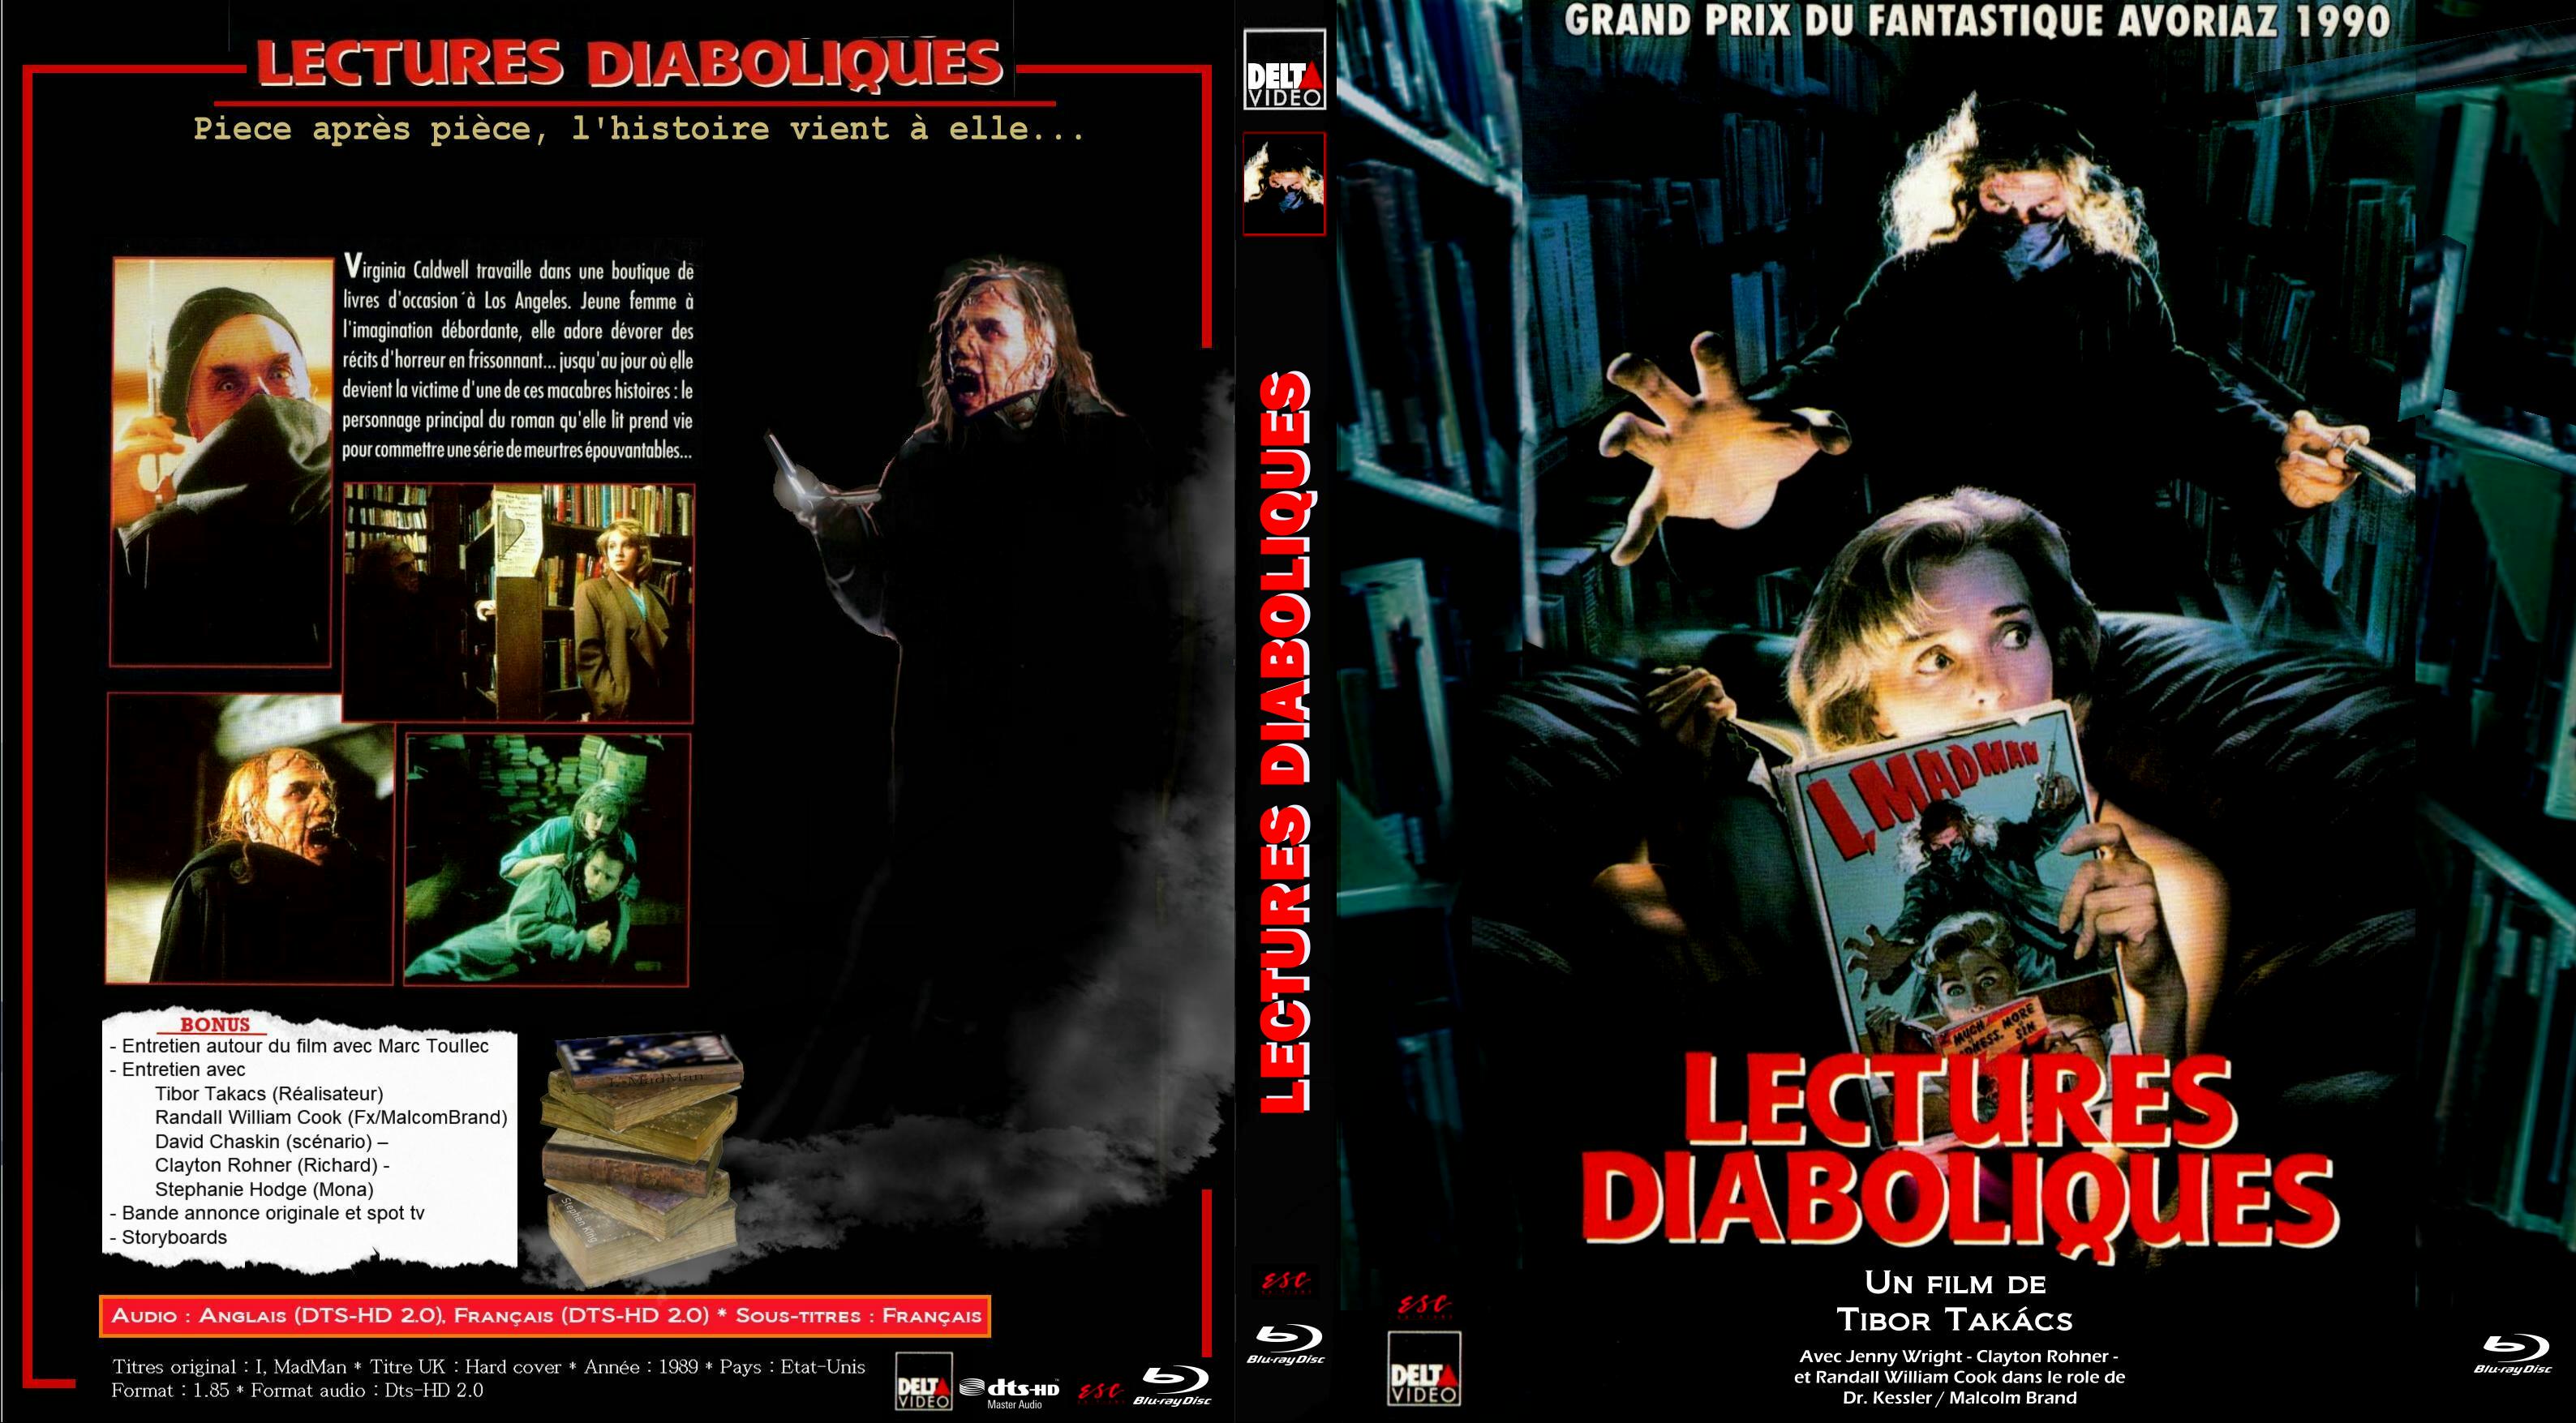 Jaquette DVD Lectures diaboliques custom (BLU-RAY)